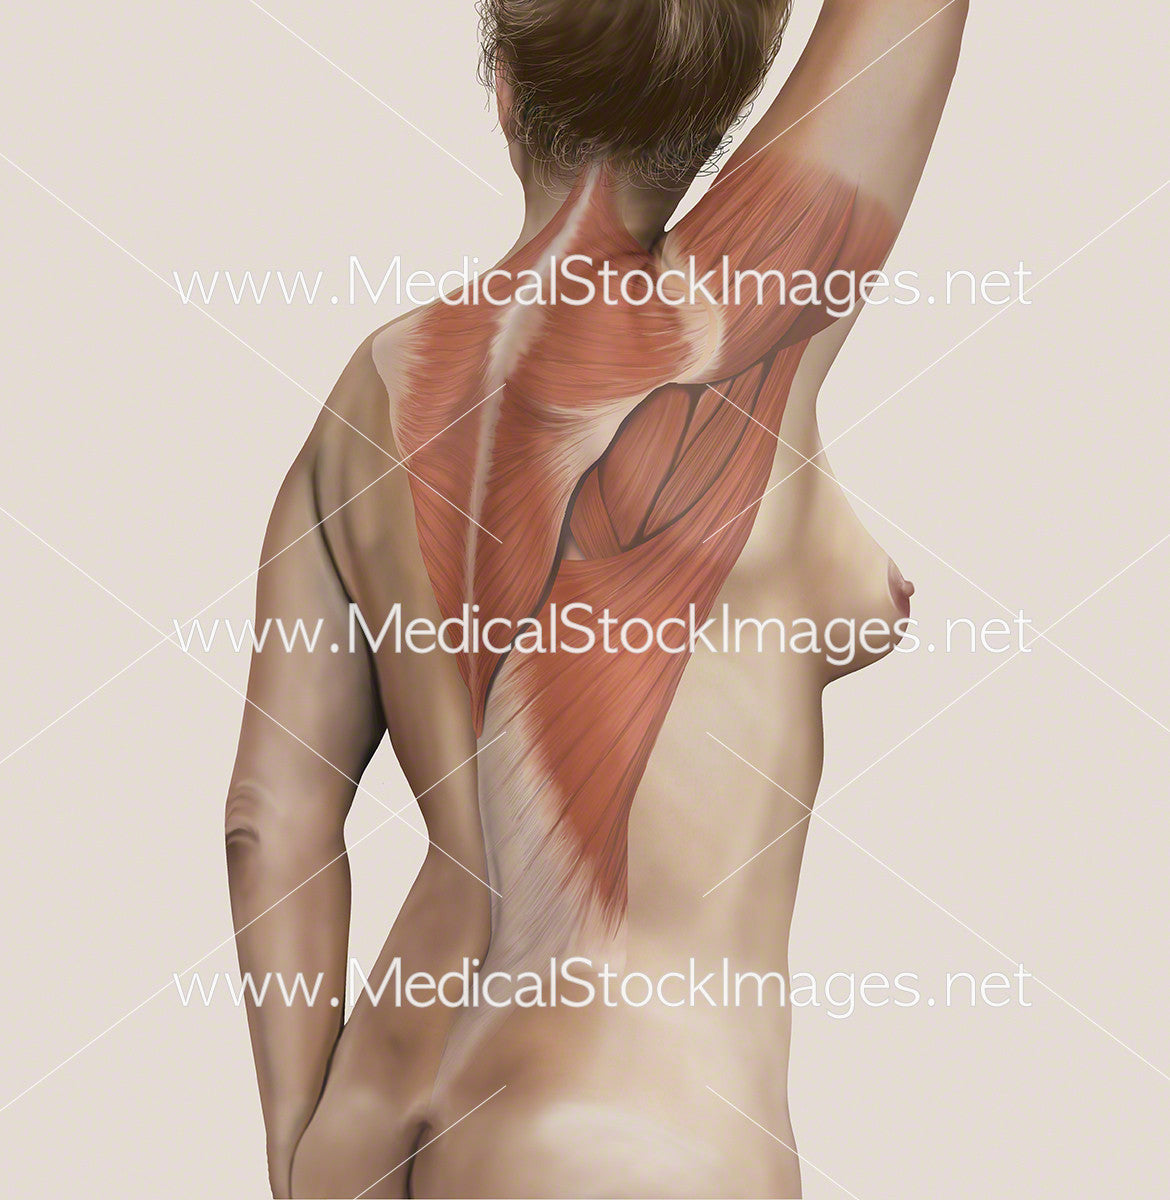 Muscles of the Back Region – Medical Stock Images Company